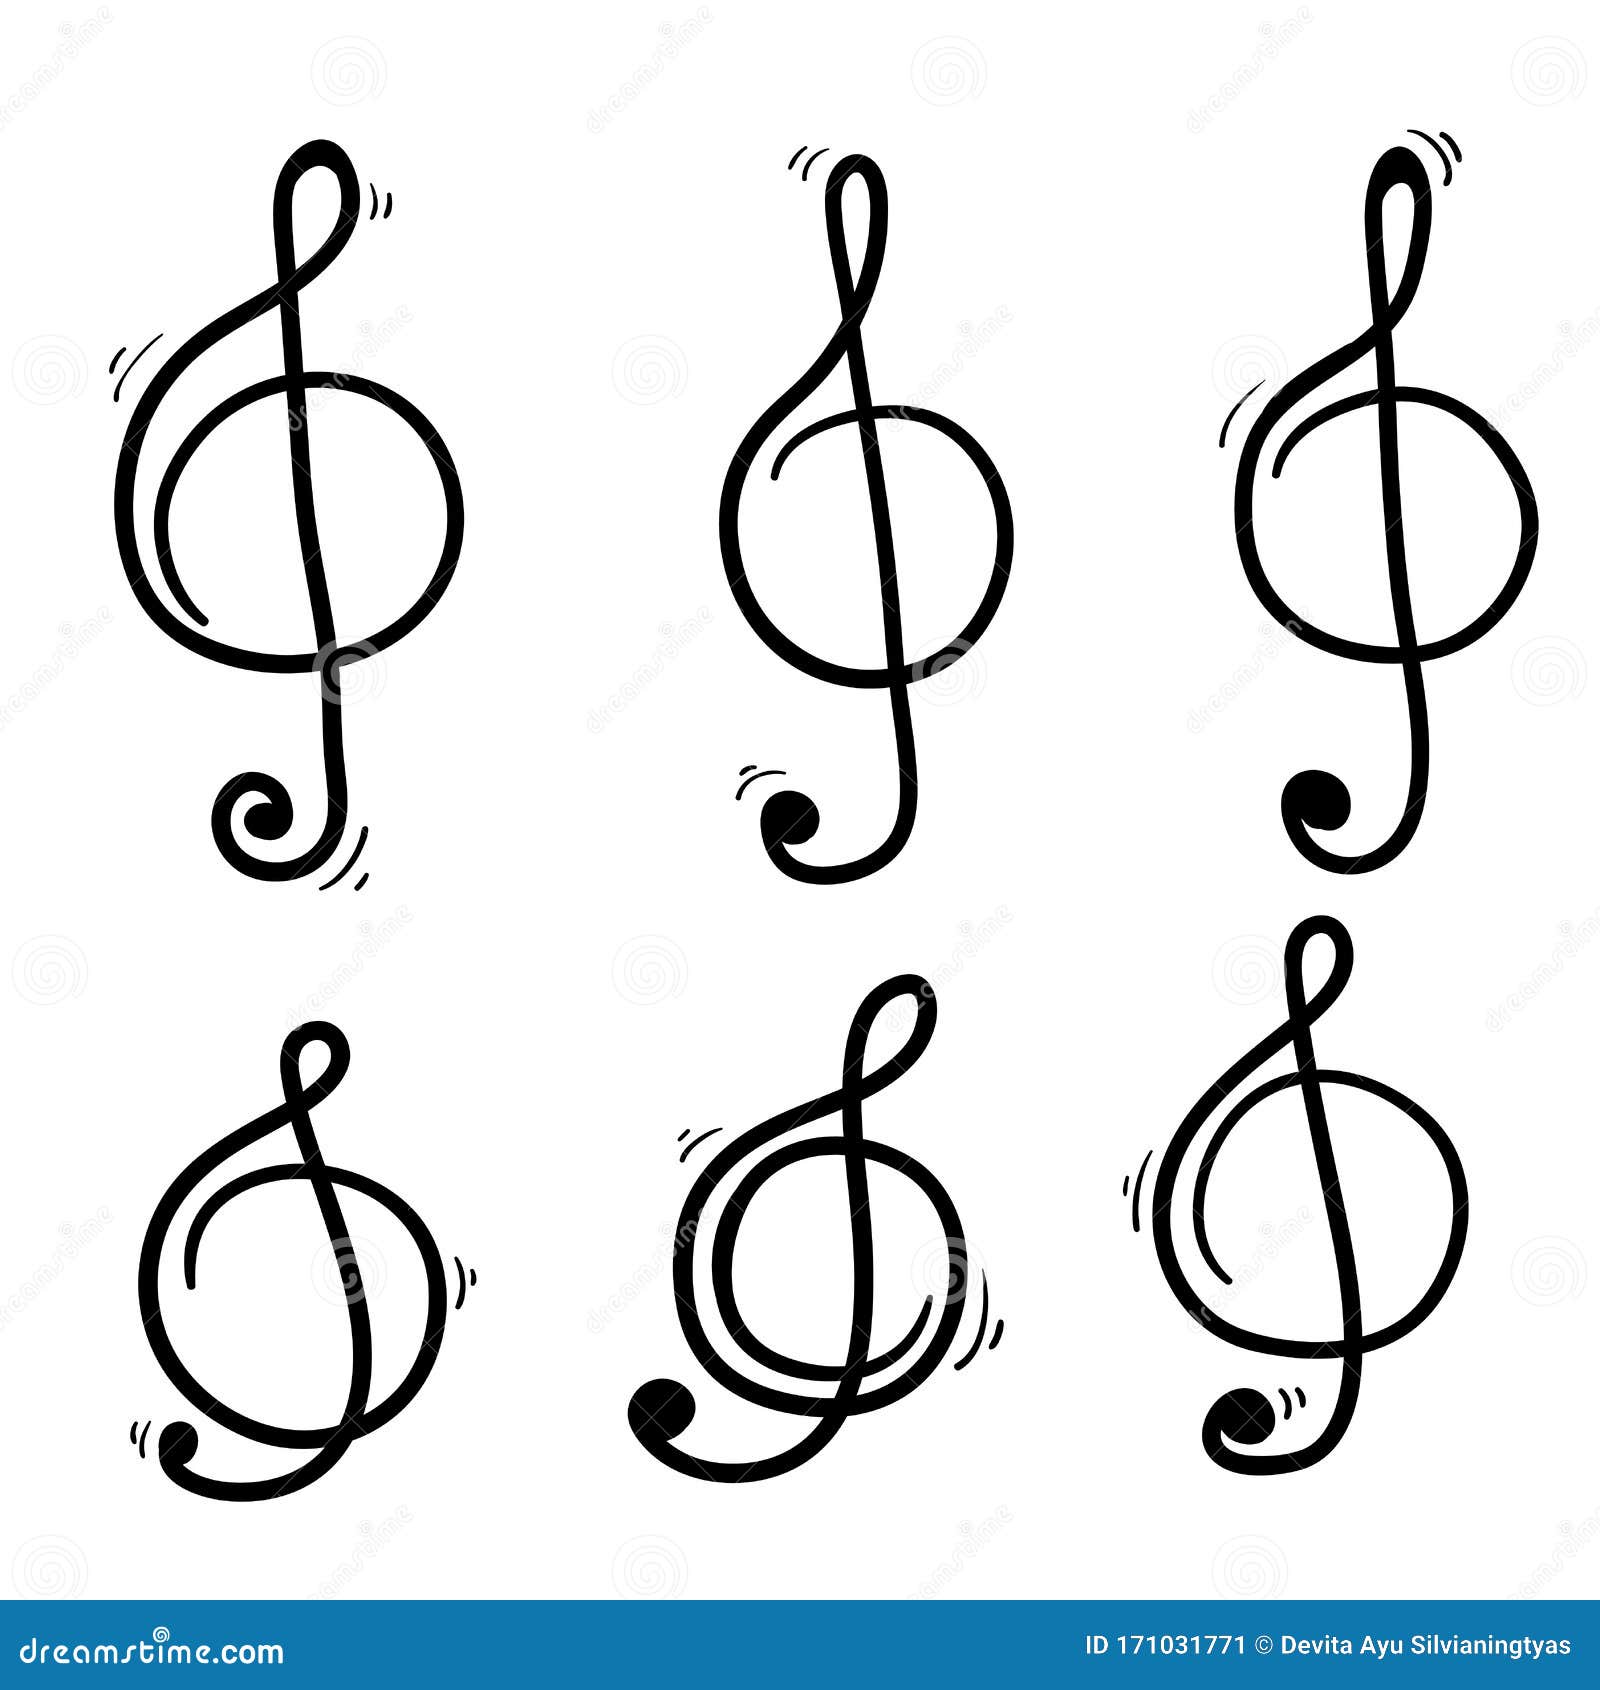 Share 131+ music sign drawing latest